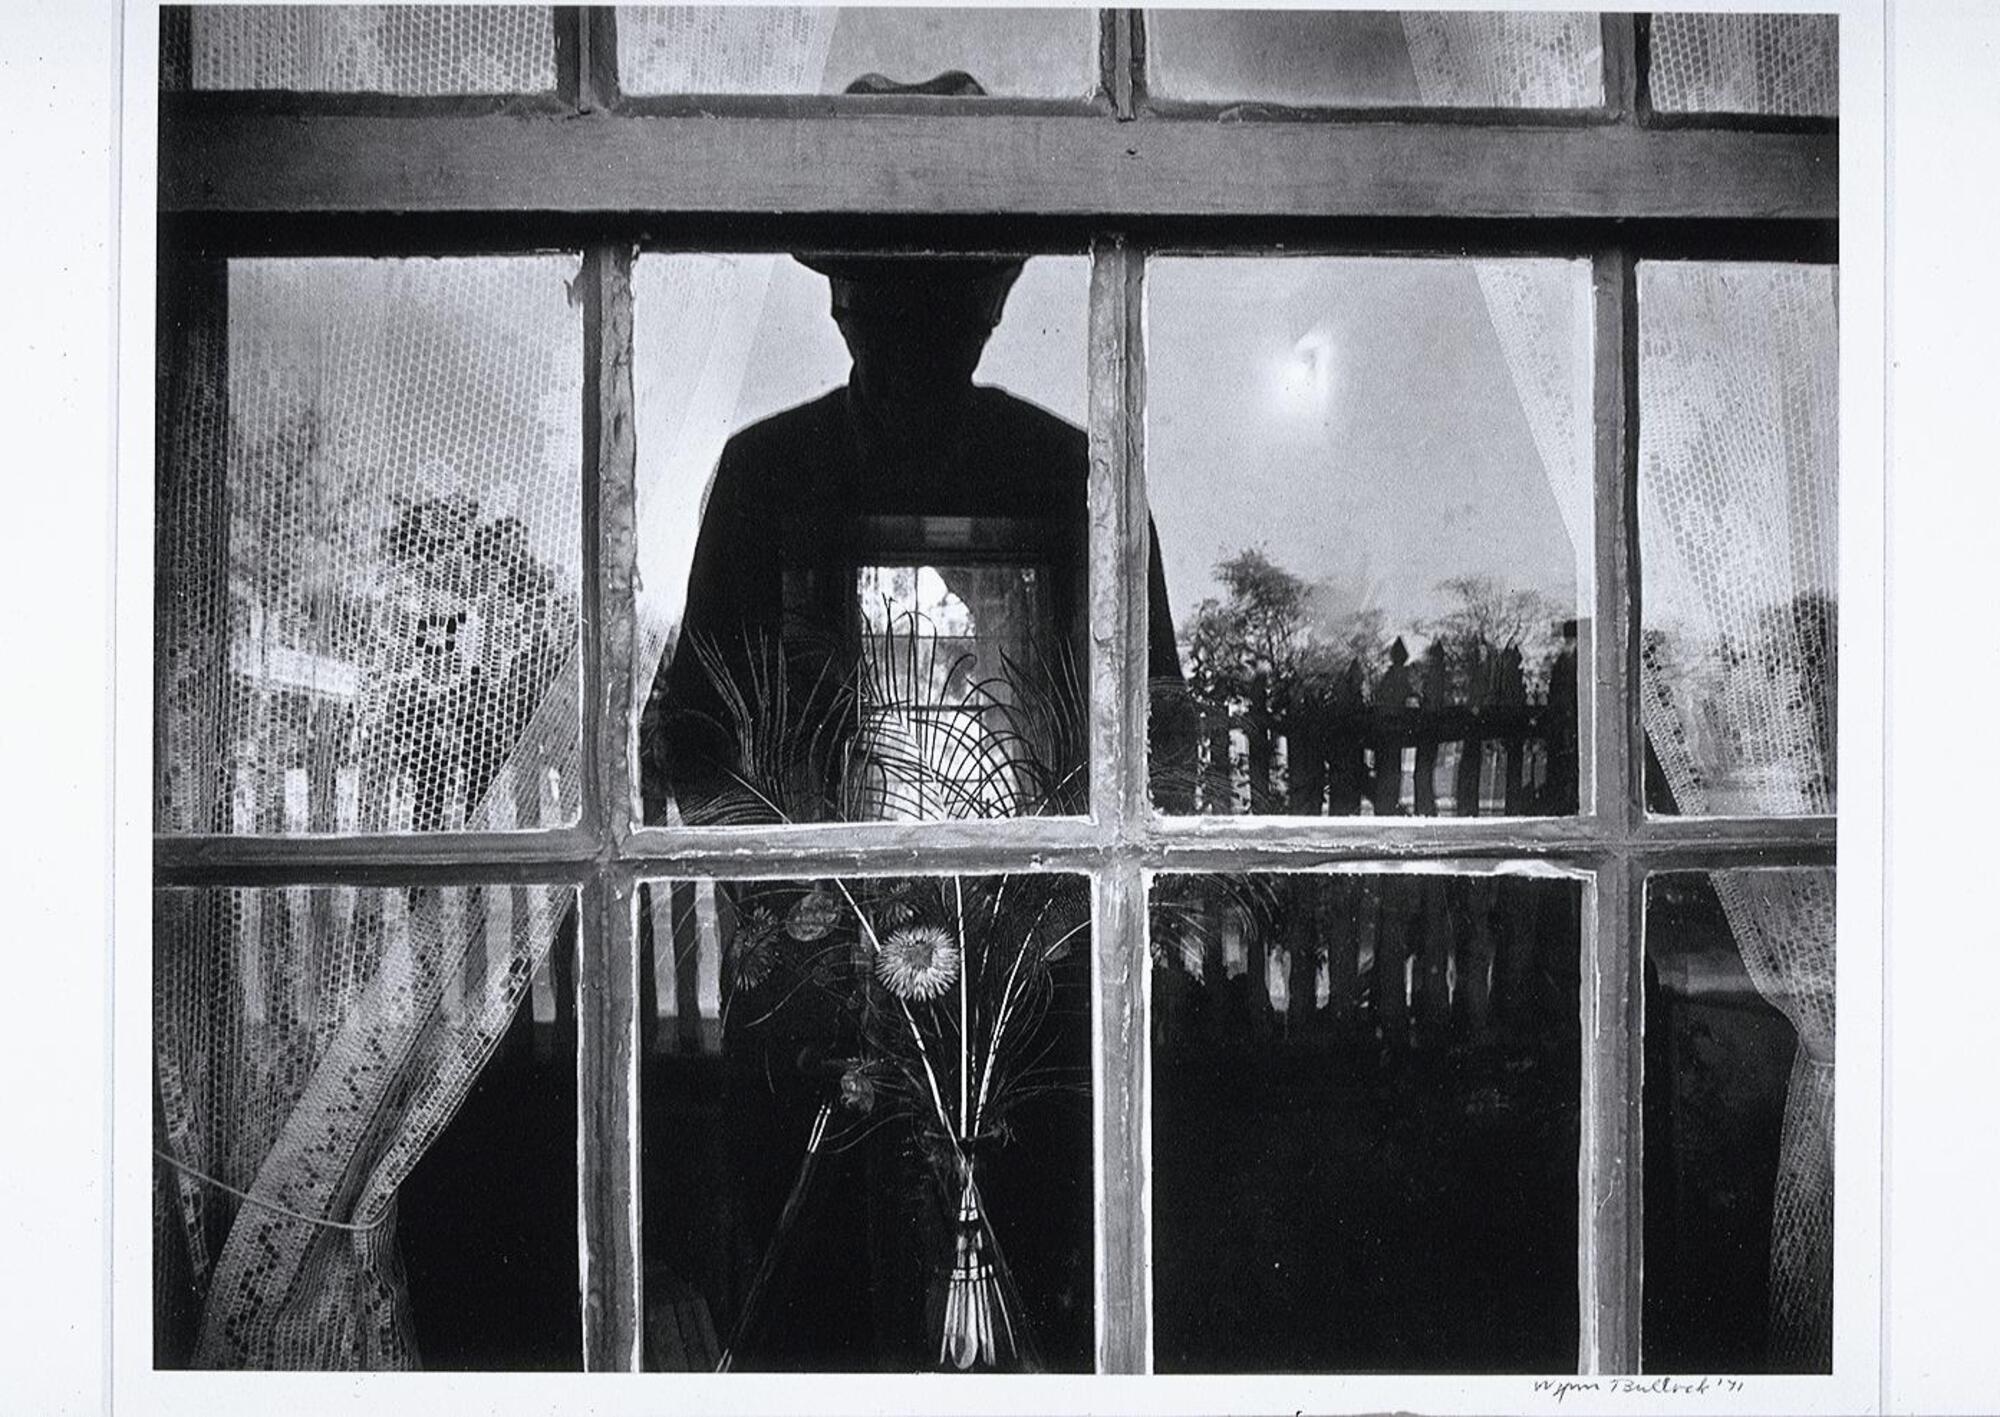 This photograph depicts a window of a house with the photographer’s reflection cast in it. Also visible in the reflection are the white picket fence and trees behind the photographer, as well as objects inside the interior of the house.